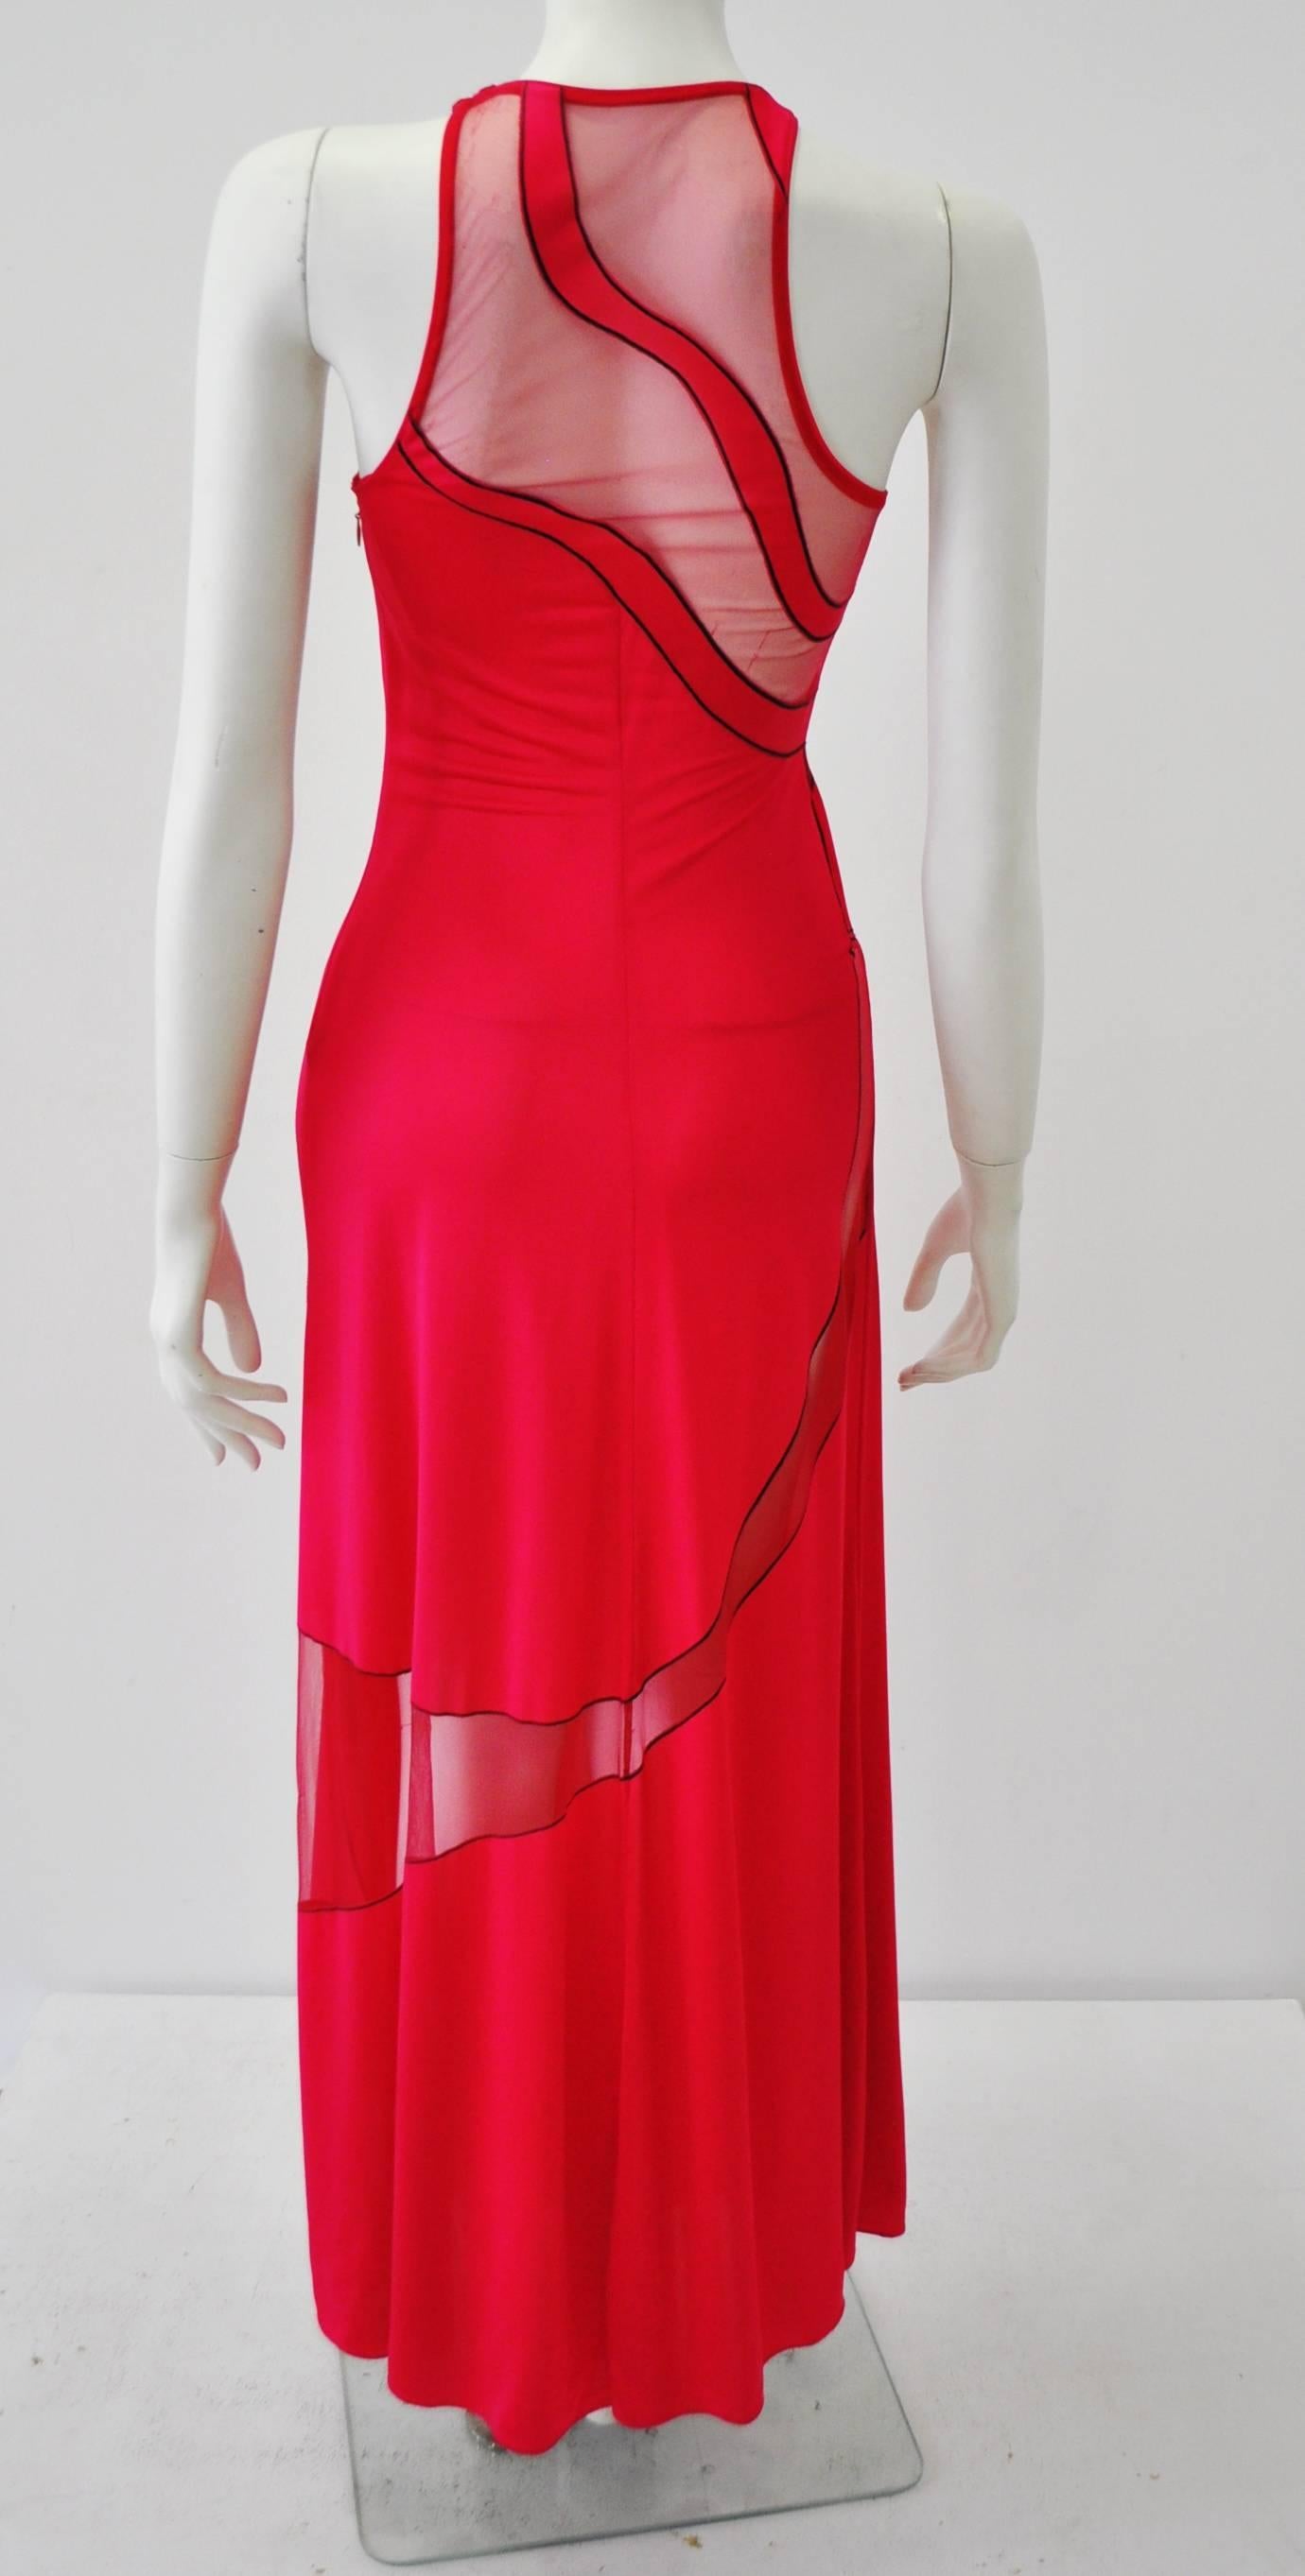 Gianni Versace Couture Cut-Out Sheer Fluorescent Raspberry Evening Gown For Sale 1